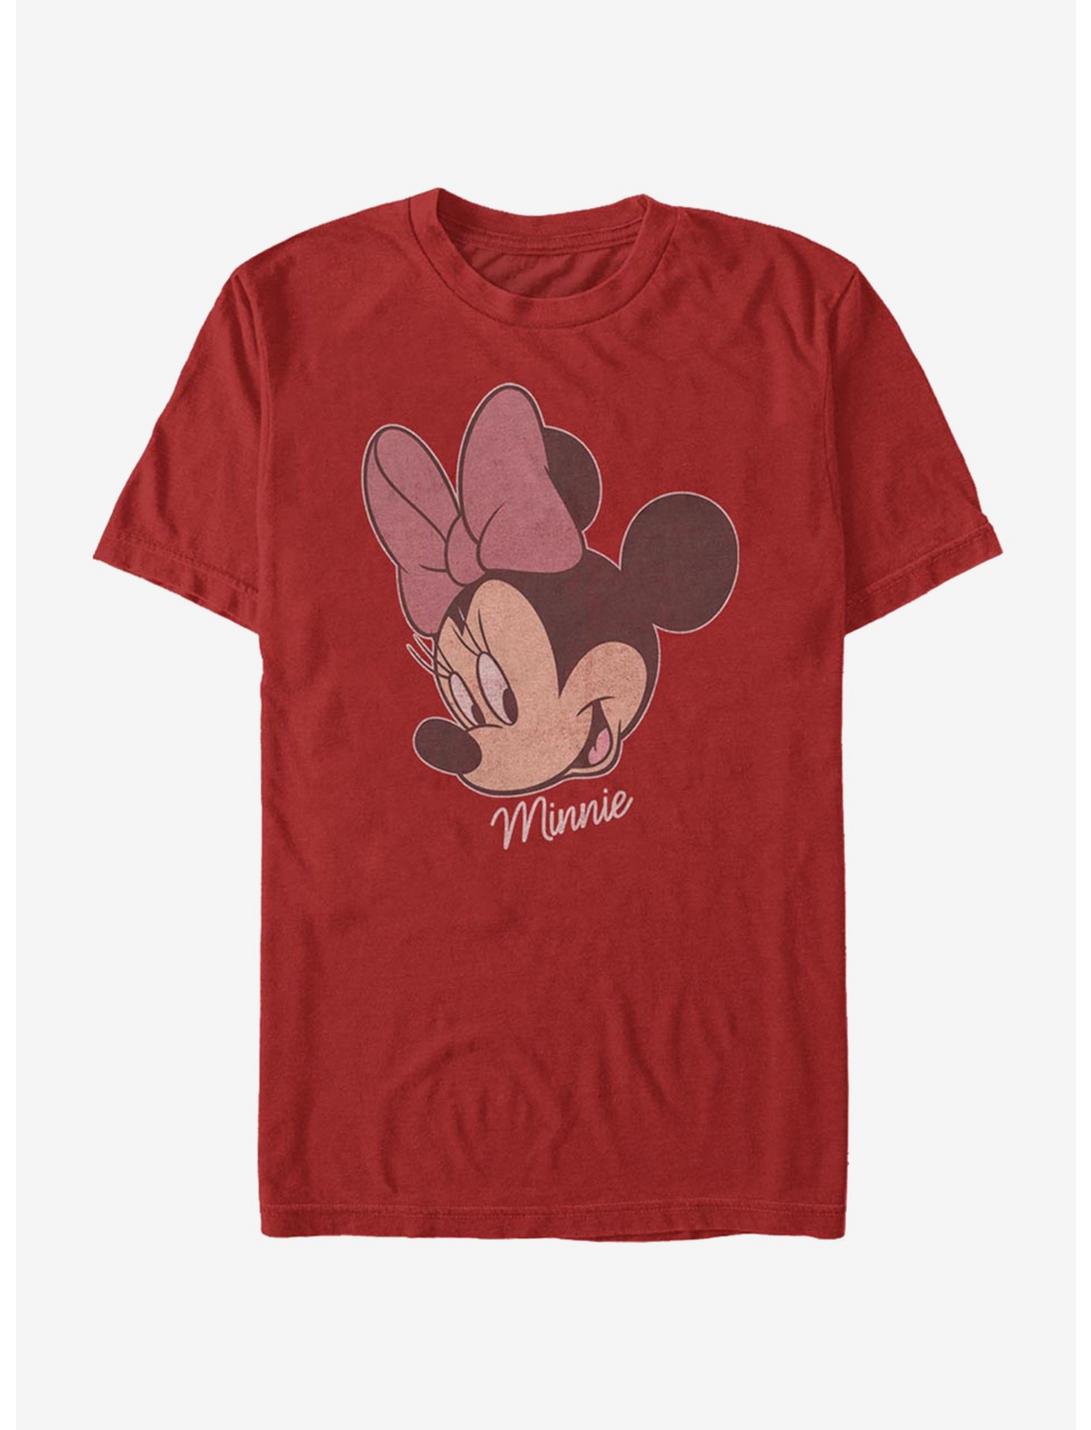 Disney Mickey Mouse Minnie Big Face Distressed T-Shirt, RED, hi-res